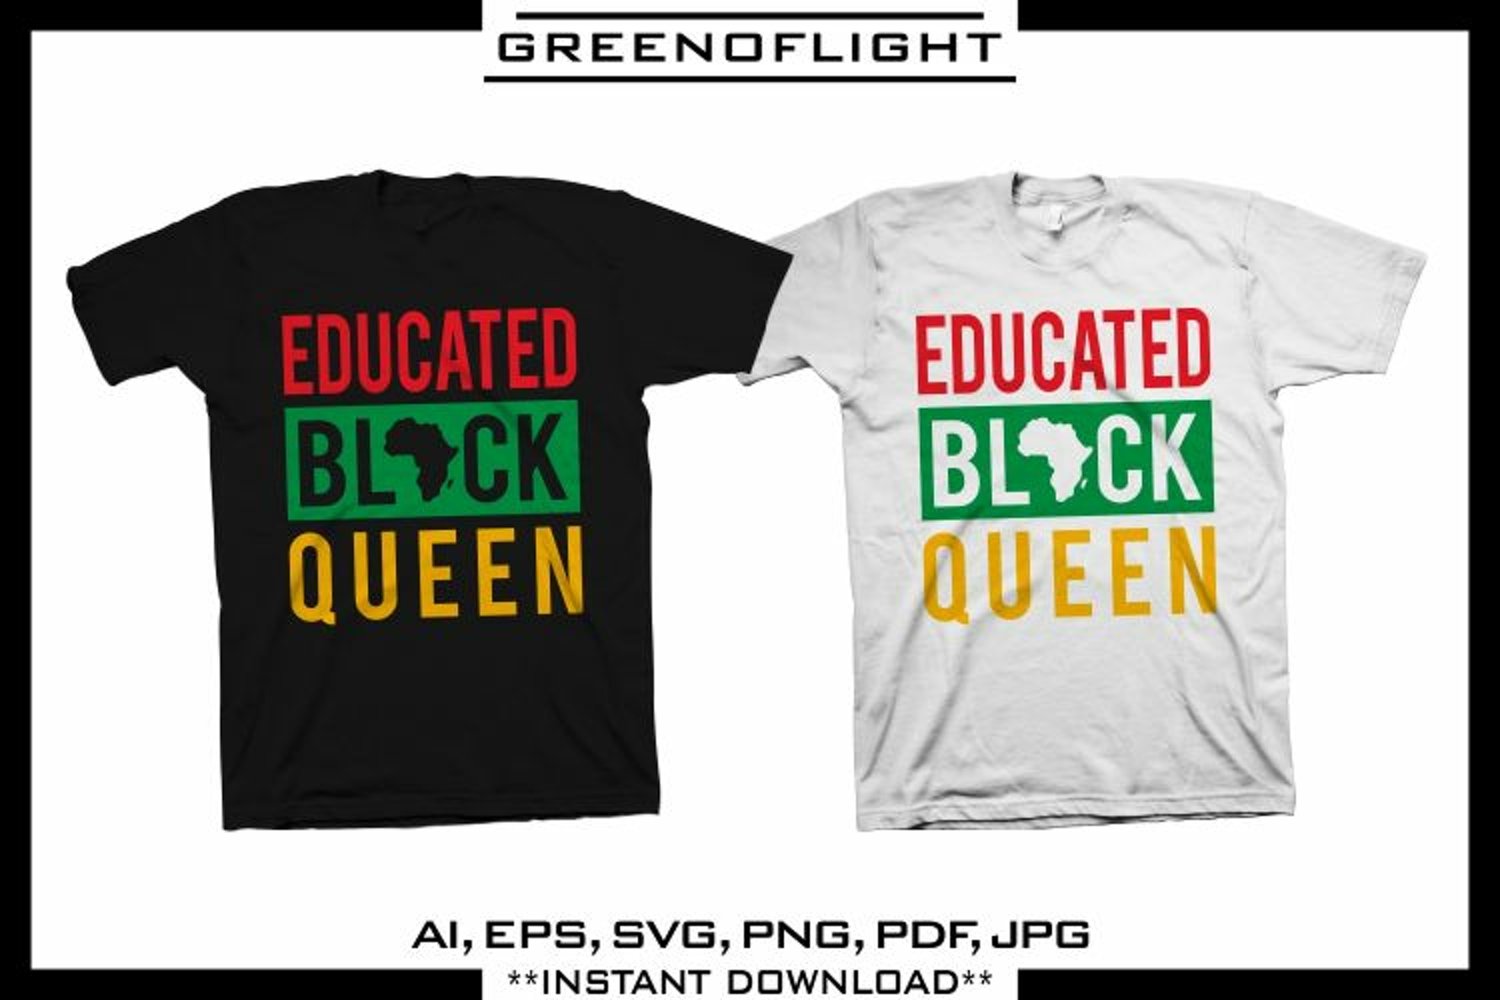 Educated black queen - colorful t-shirt design.